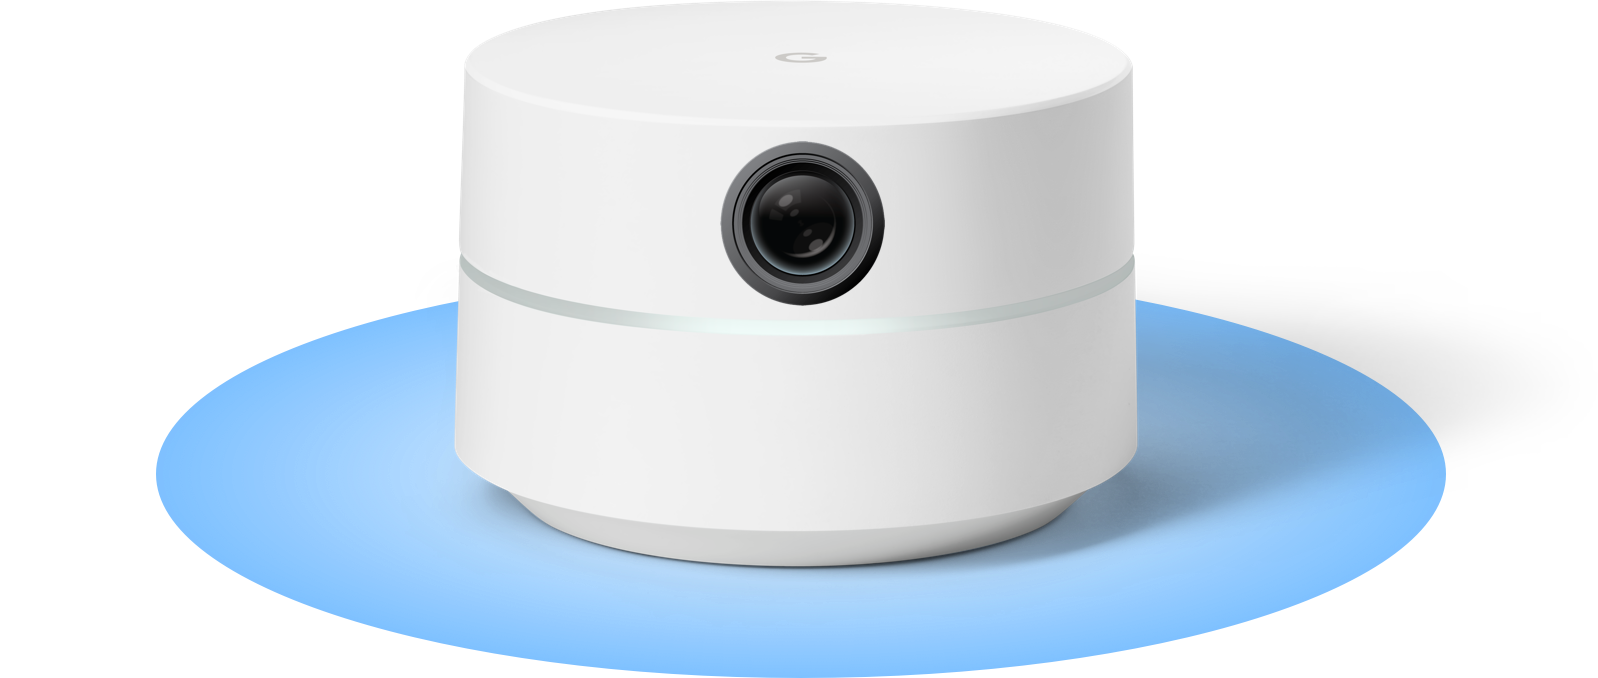 8MP camera upgrade for home security 